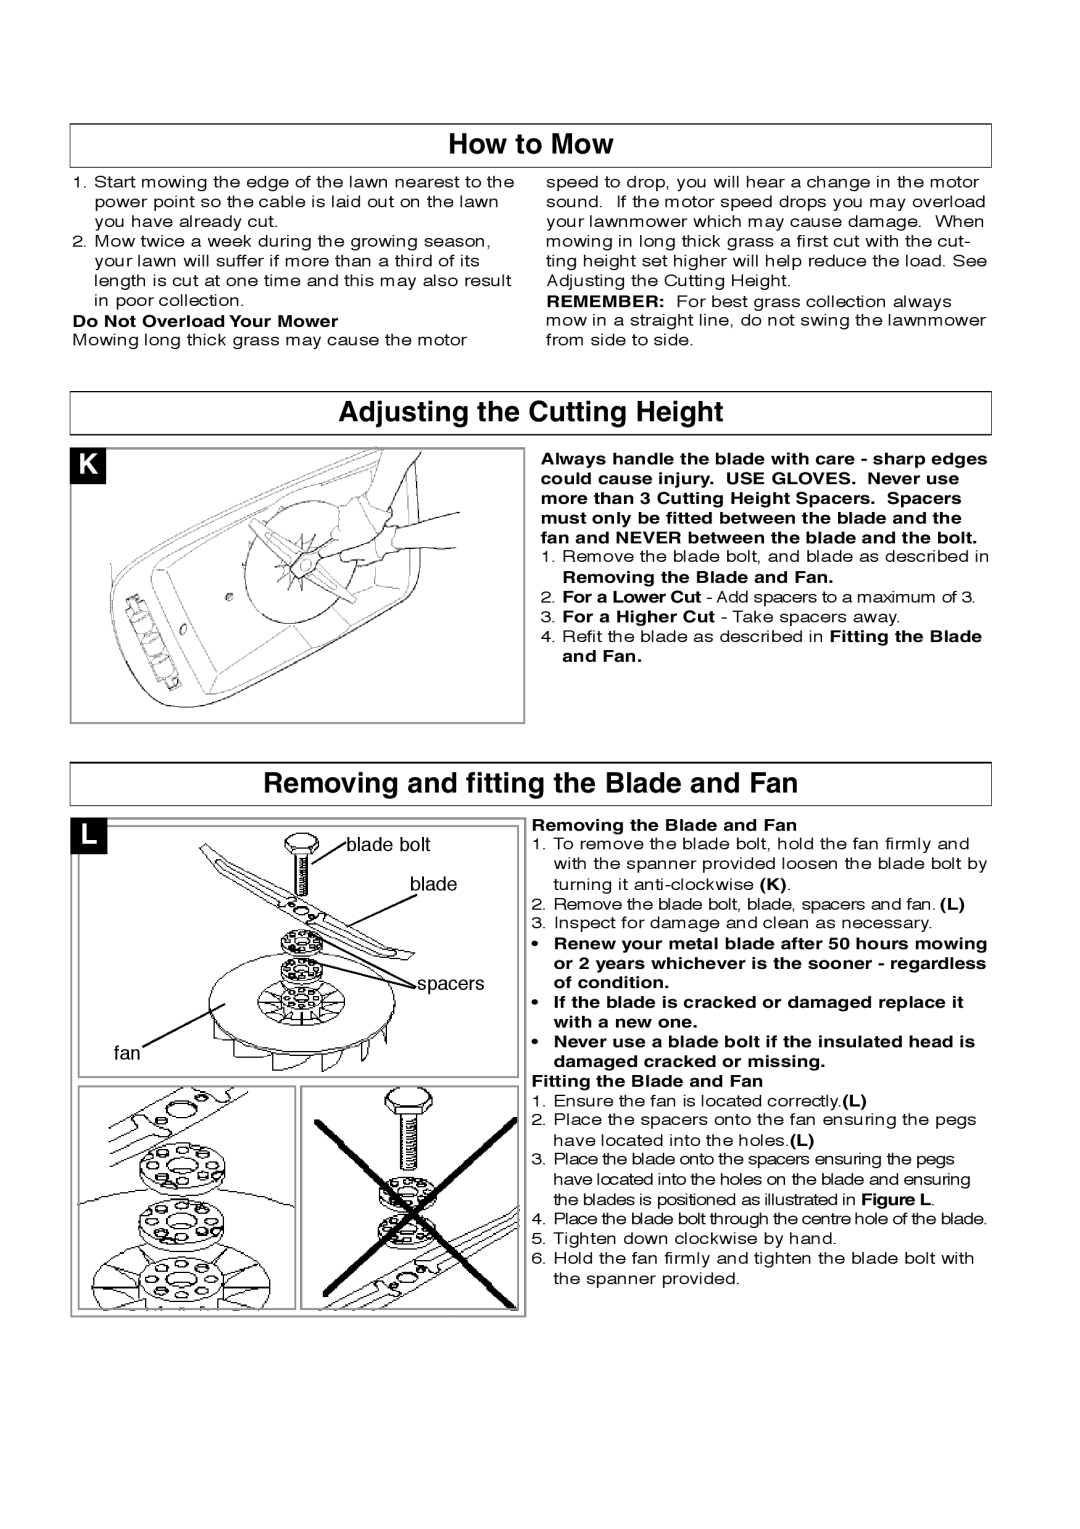 Flymo Turbo Compact manual How to Mow, Adjusting the Cutting Height, Removing and fitting the Blade and Fan, blade bolt 